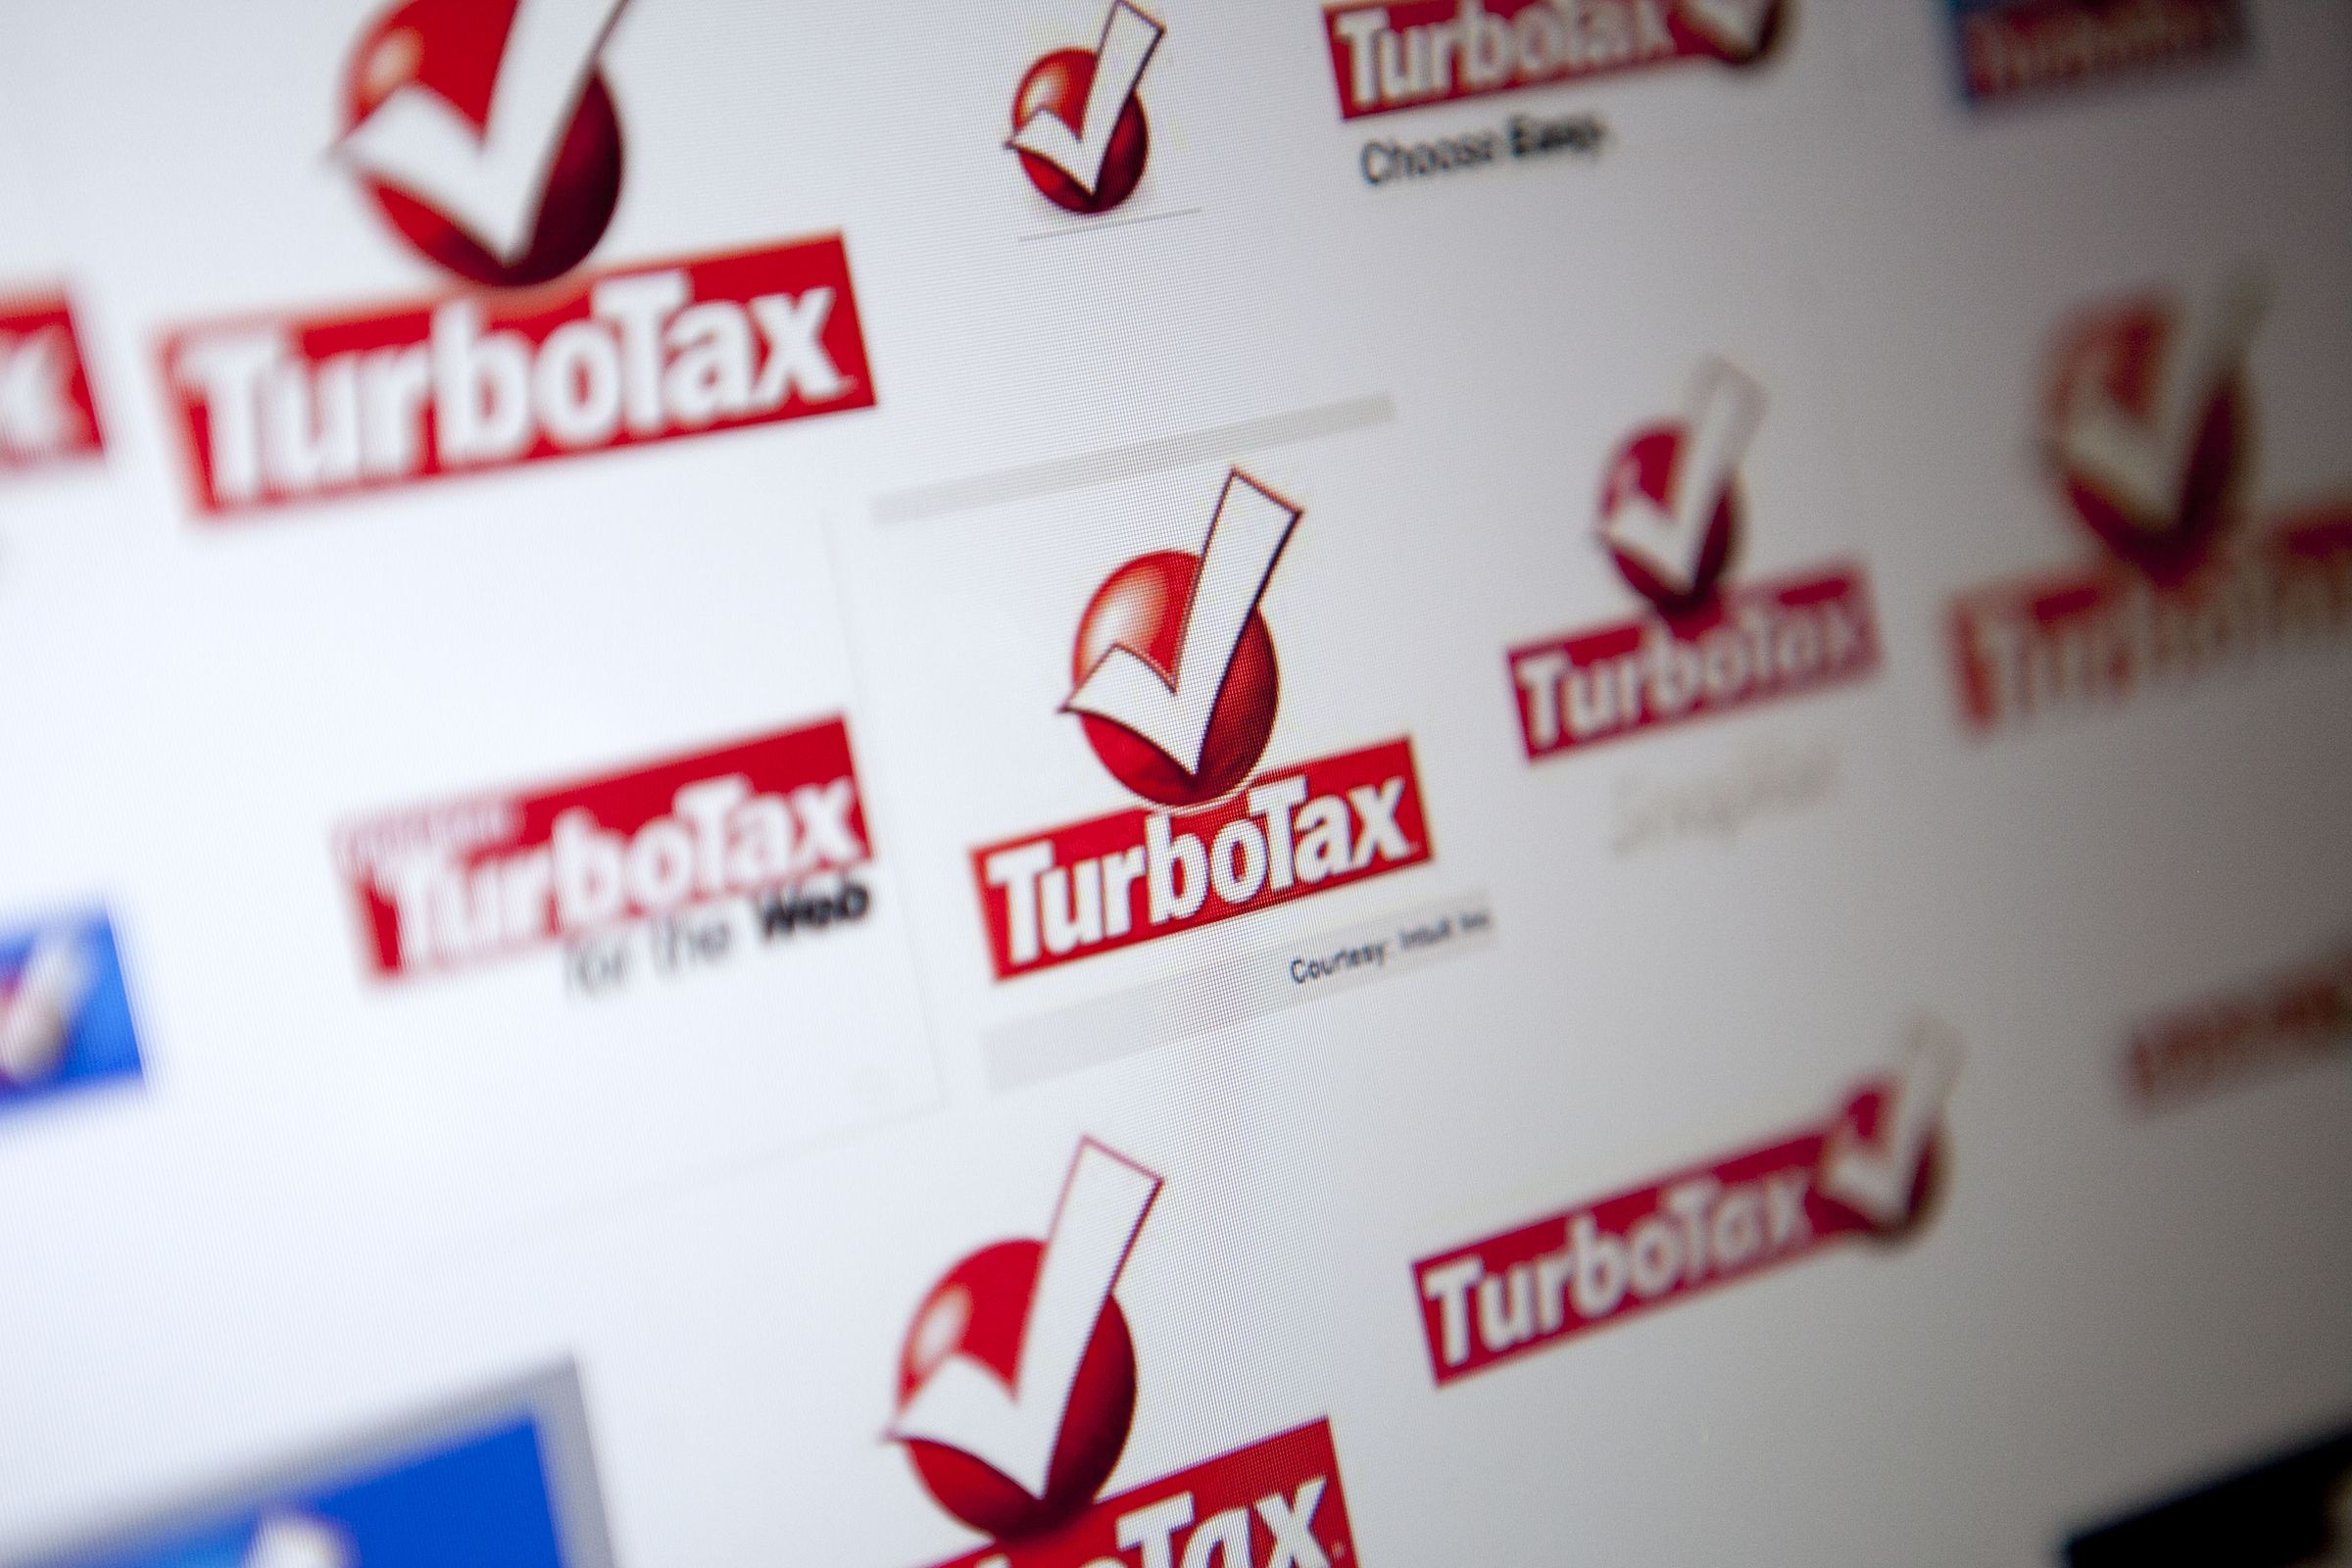 Intuit Inc.’s TurboTax Software